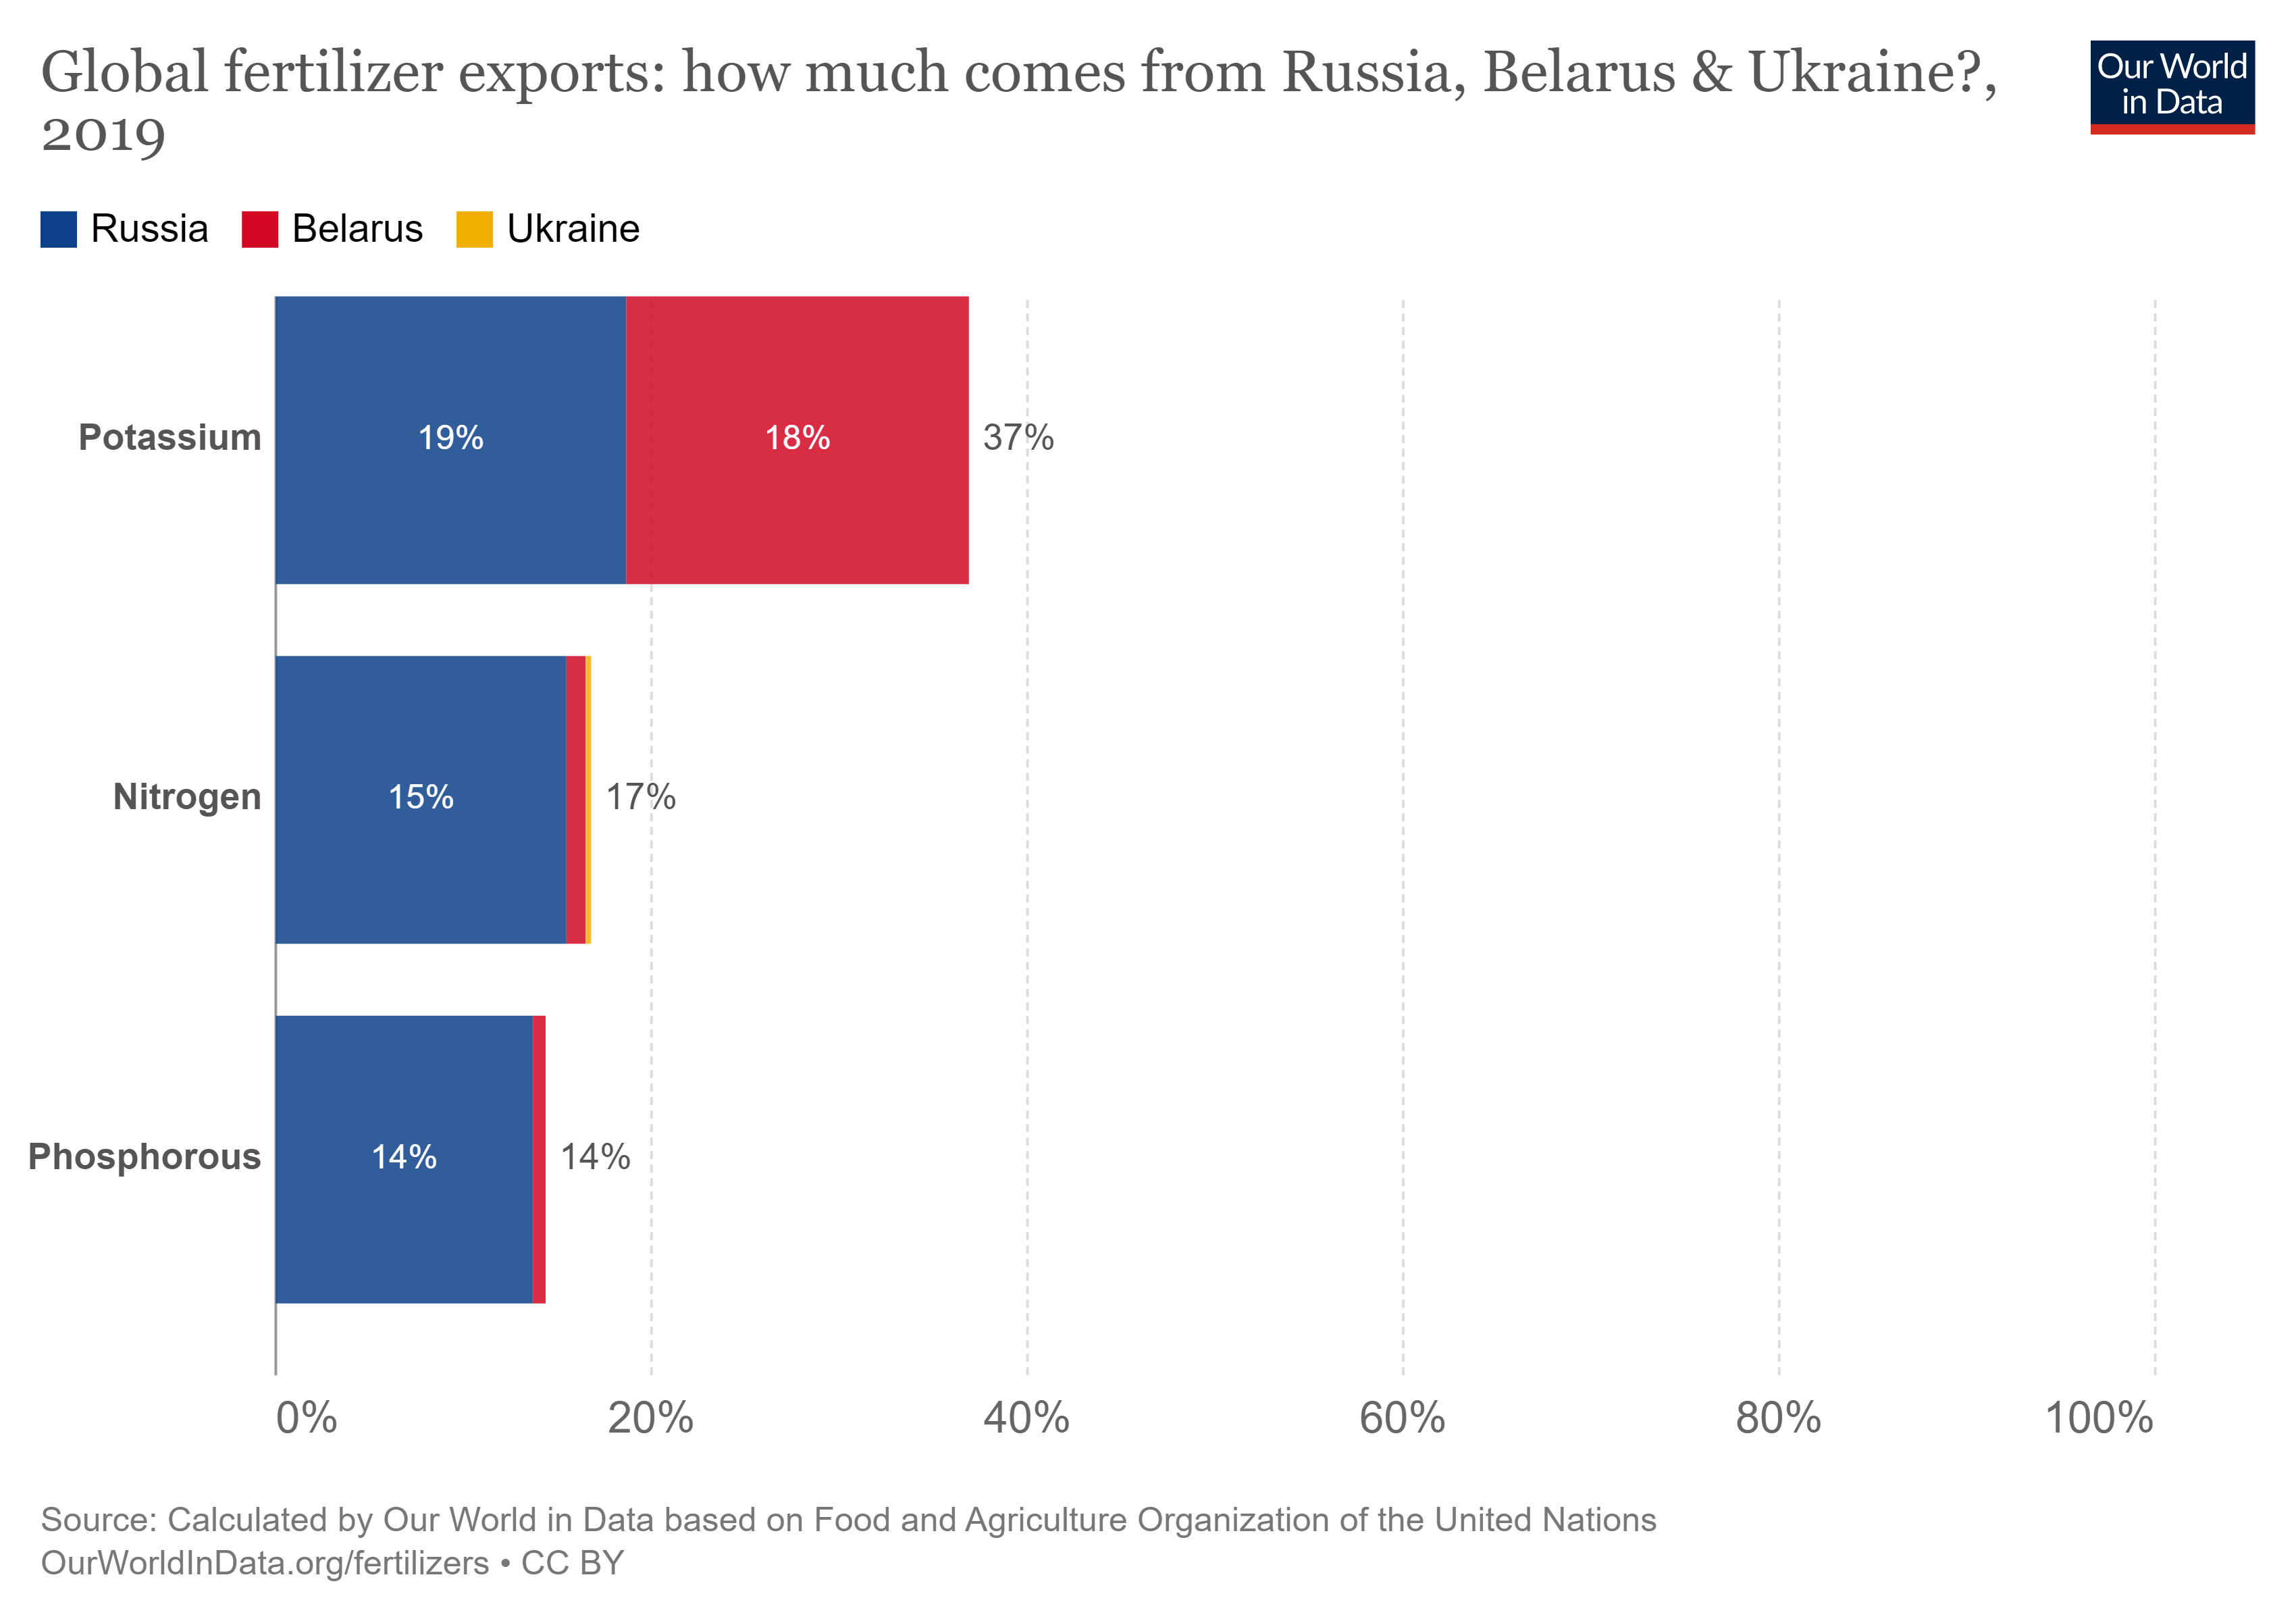 Russia and Belarius are responsible for 37% of the world's potassium fertiliser exports. Source: Our World in Data, Food and Agriculture Organization of the United Nations.